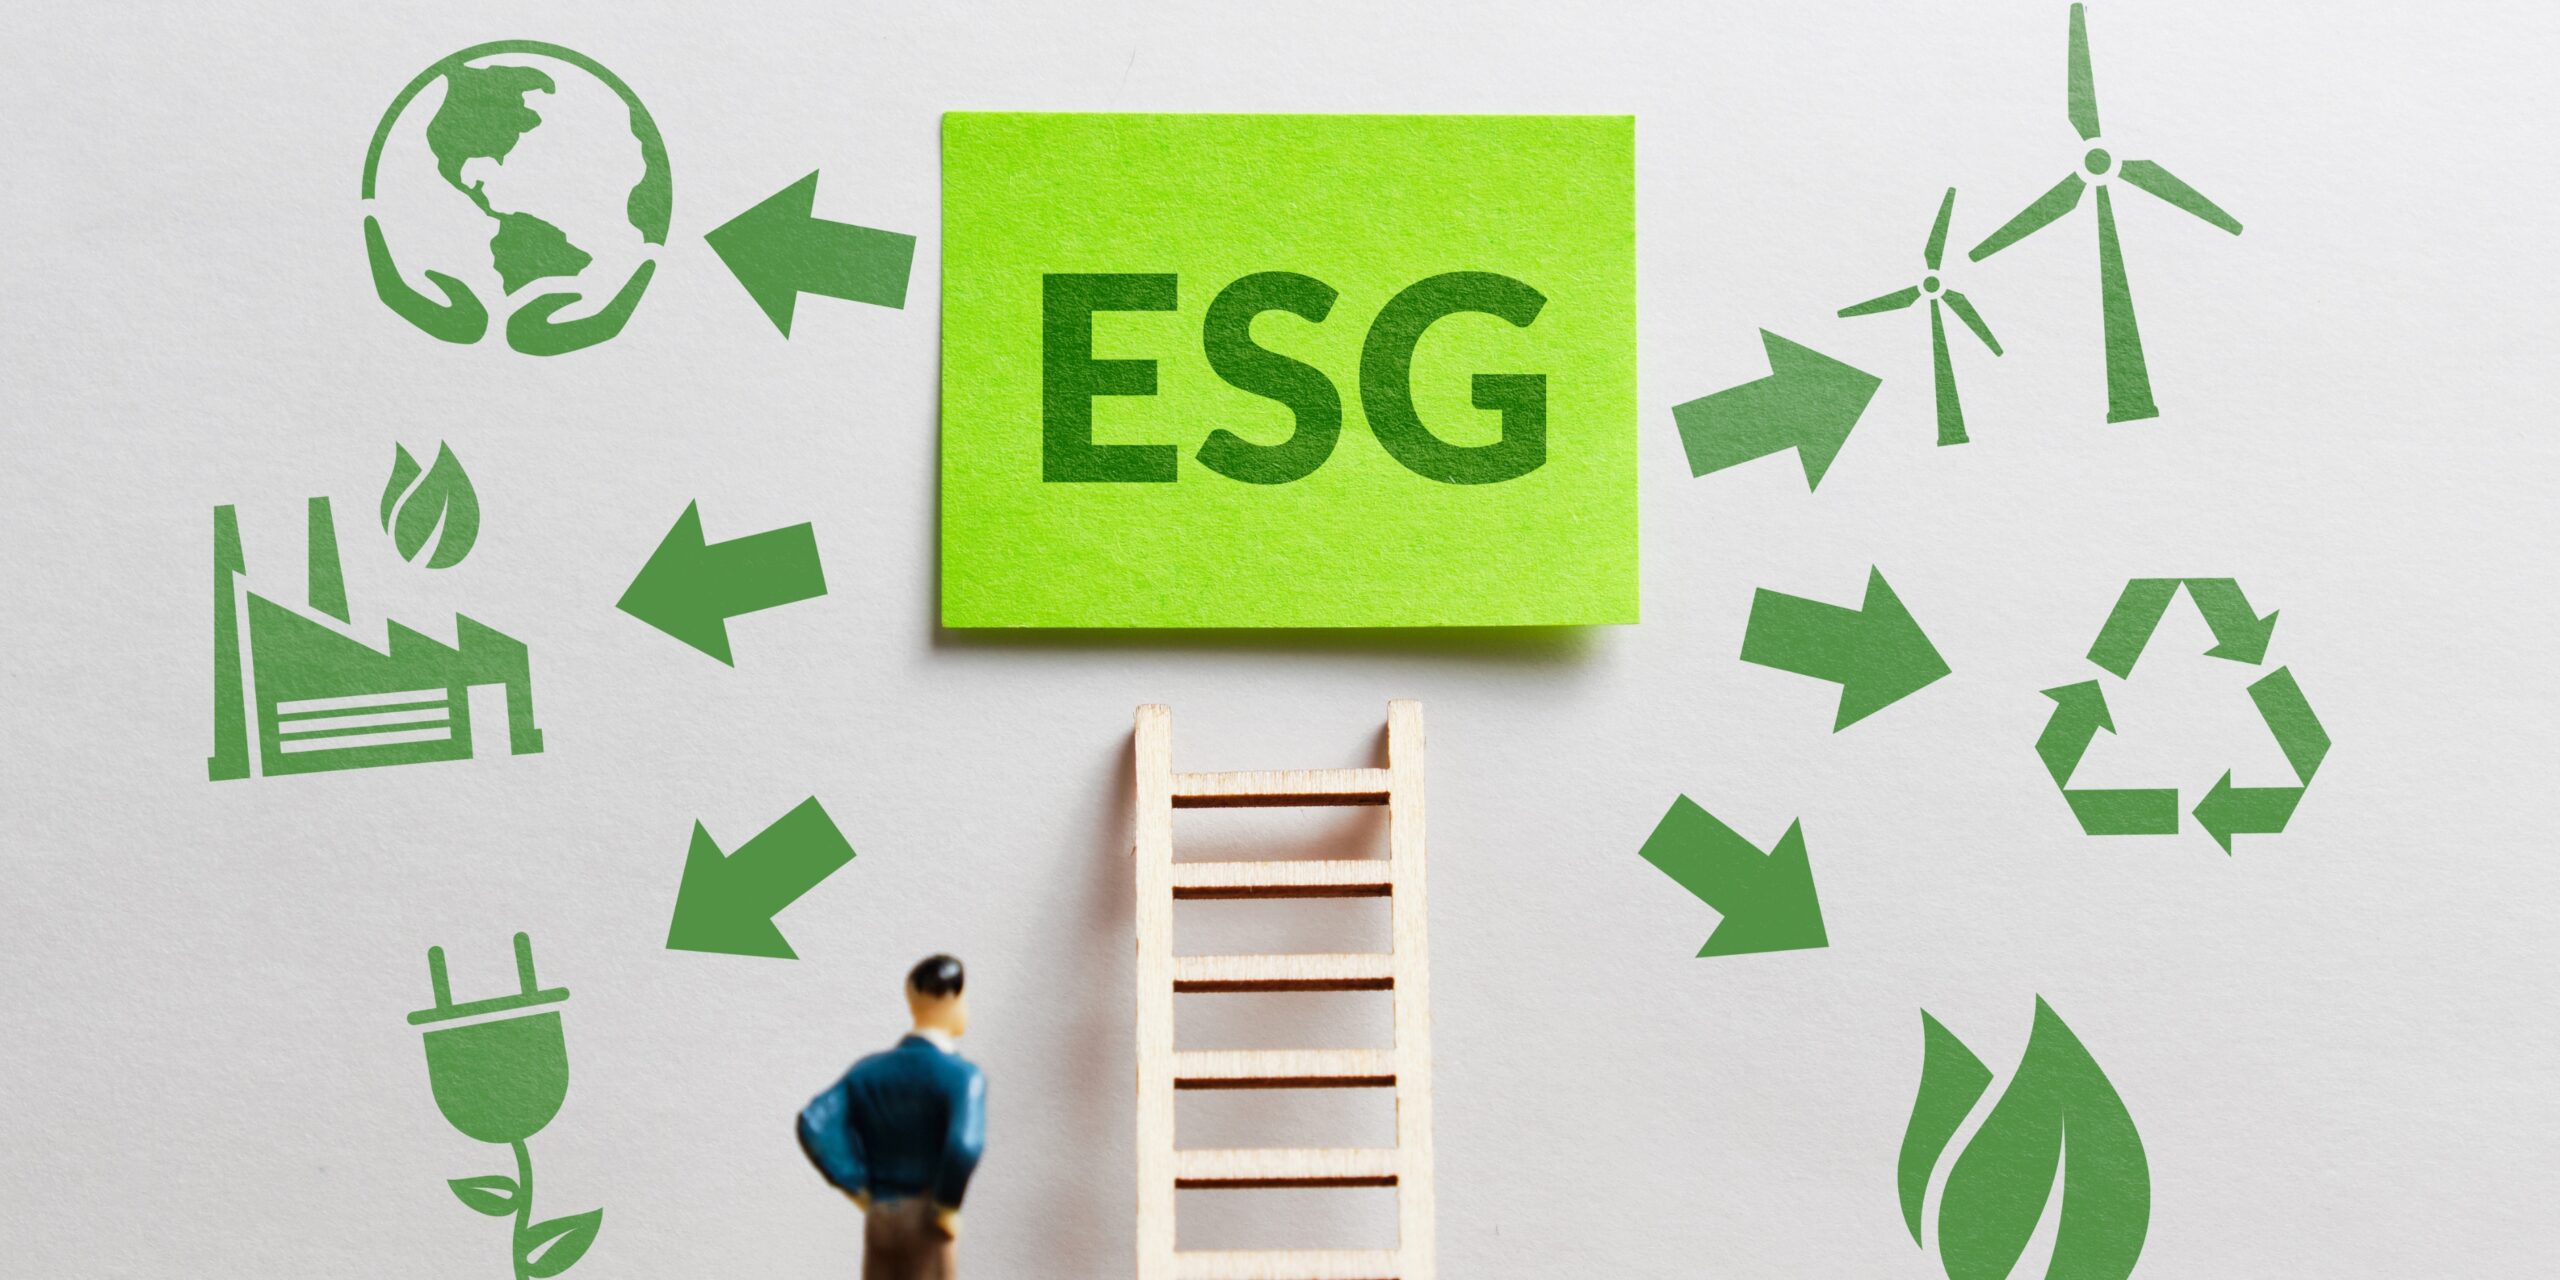 A green square with the letters 'ESG' written. Around the green square are symbols of the earth, recycling and the environment. There is a plastic ladder and person standing underneath the green square.